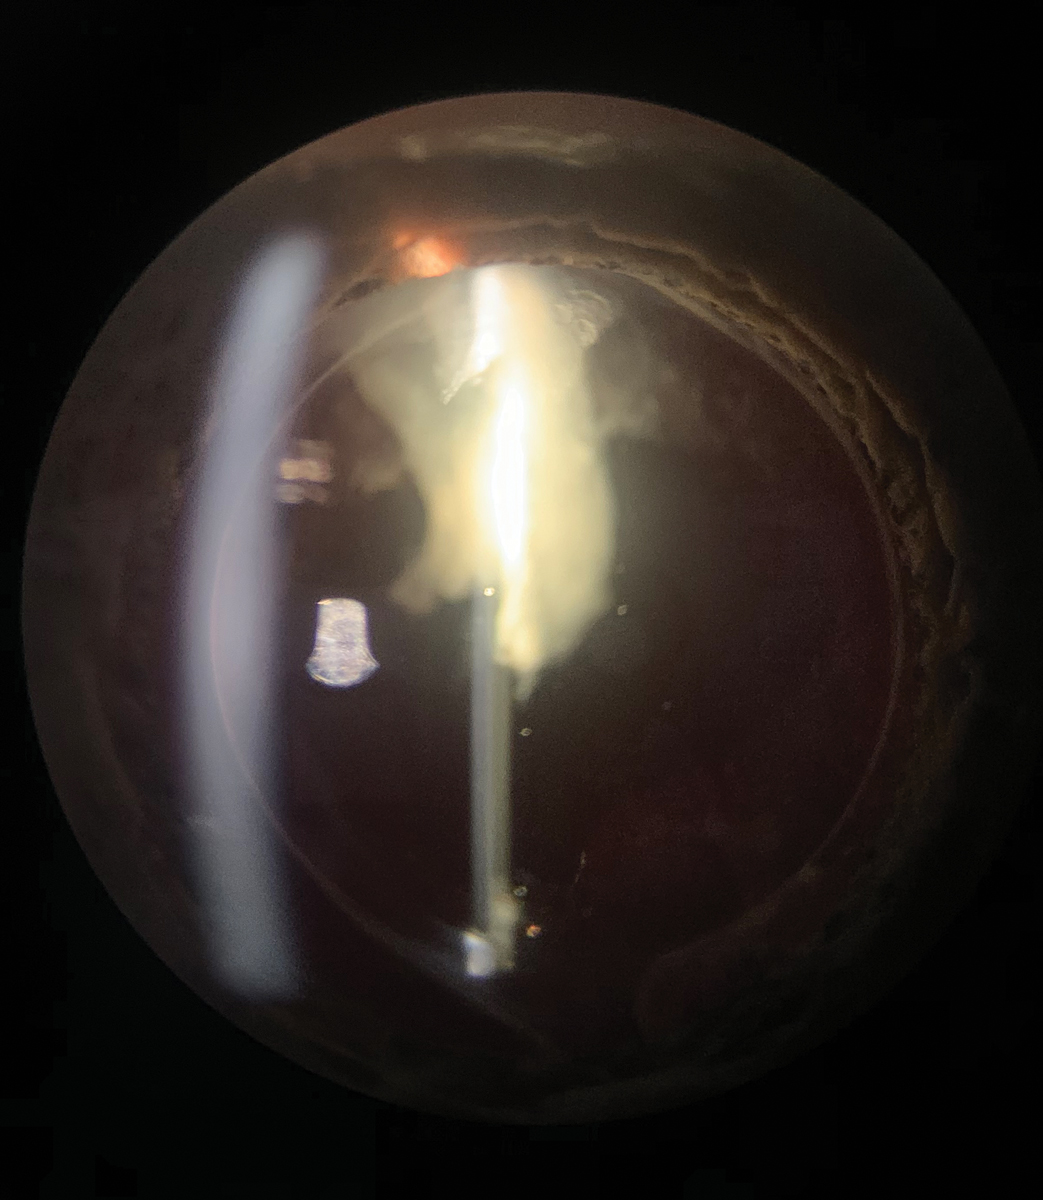 This large retained lens fragment protruding into this patient’s visual axis caused phacoanaphylaxis.